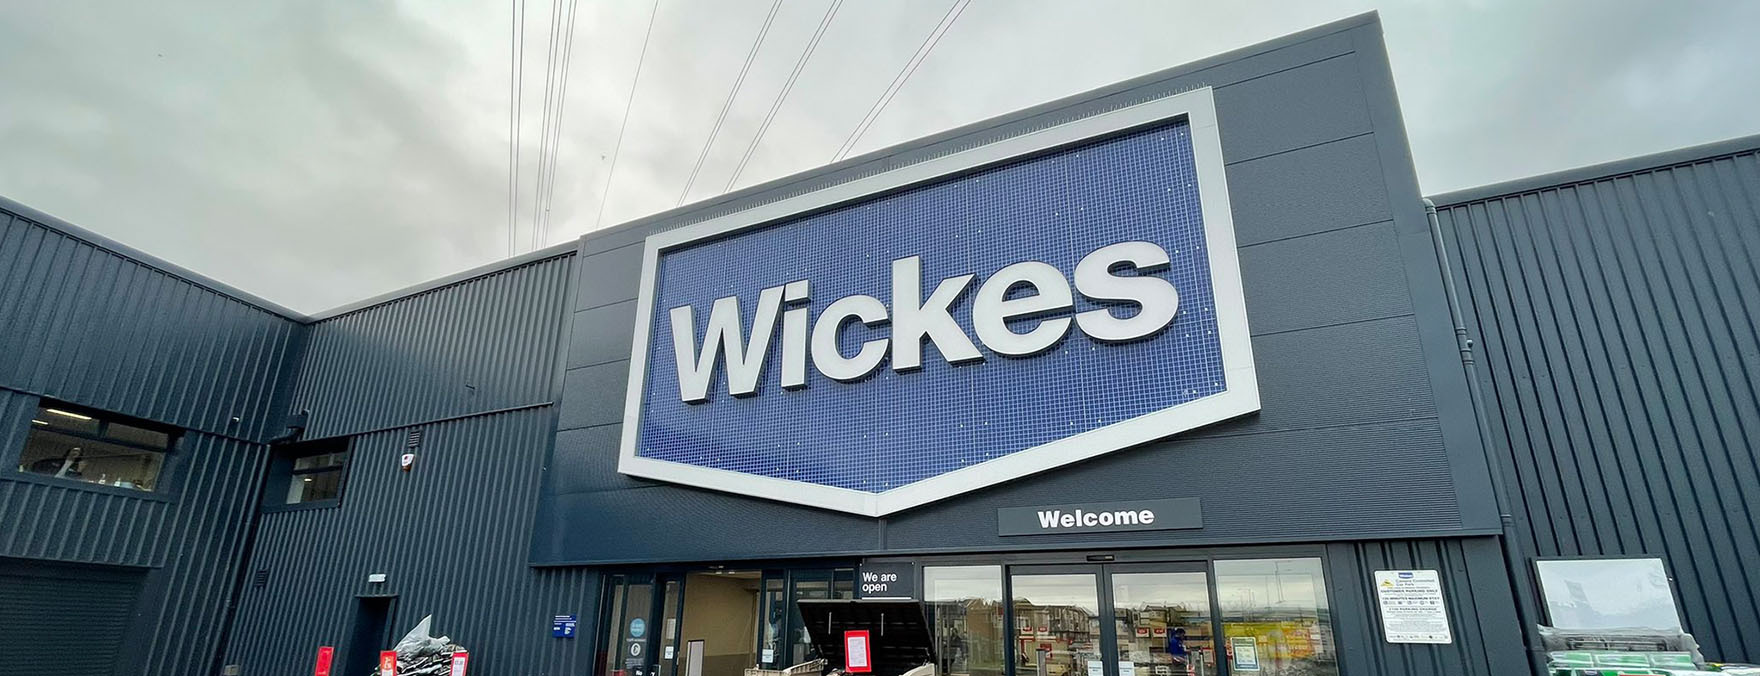 The Wickes Group Plc logo is painted in blue and white on the storefront wall.